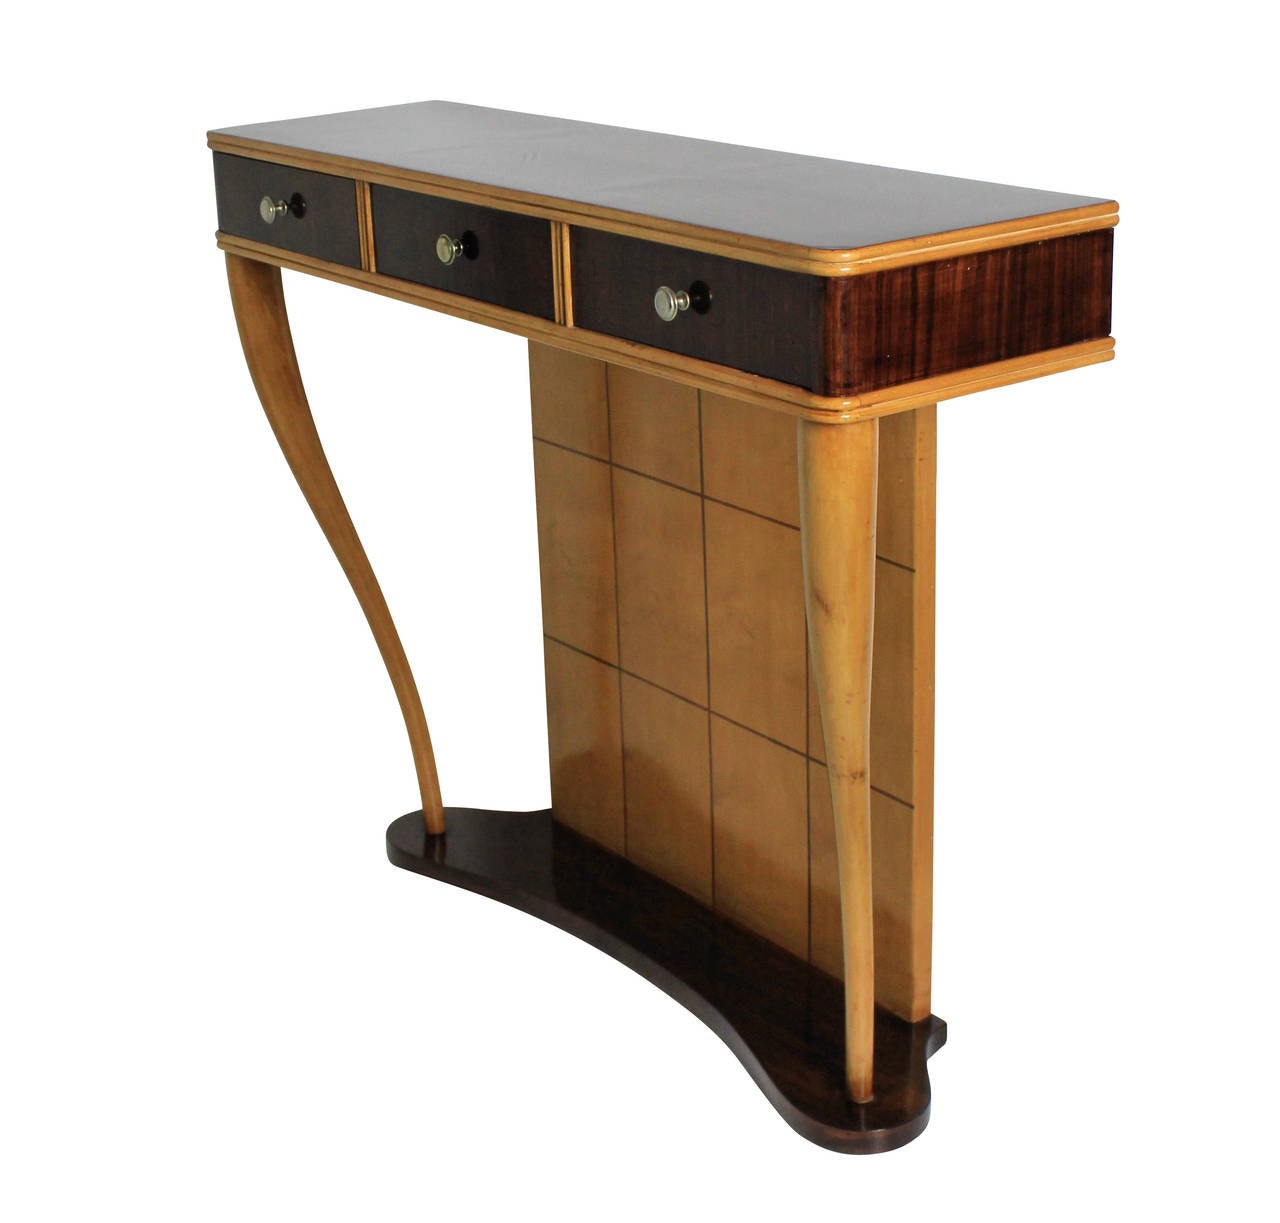 An Italian console table of stylish design, comprising three drawers with sculpted legs and base.